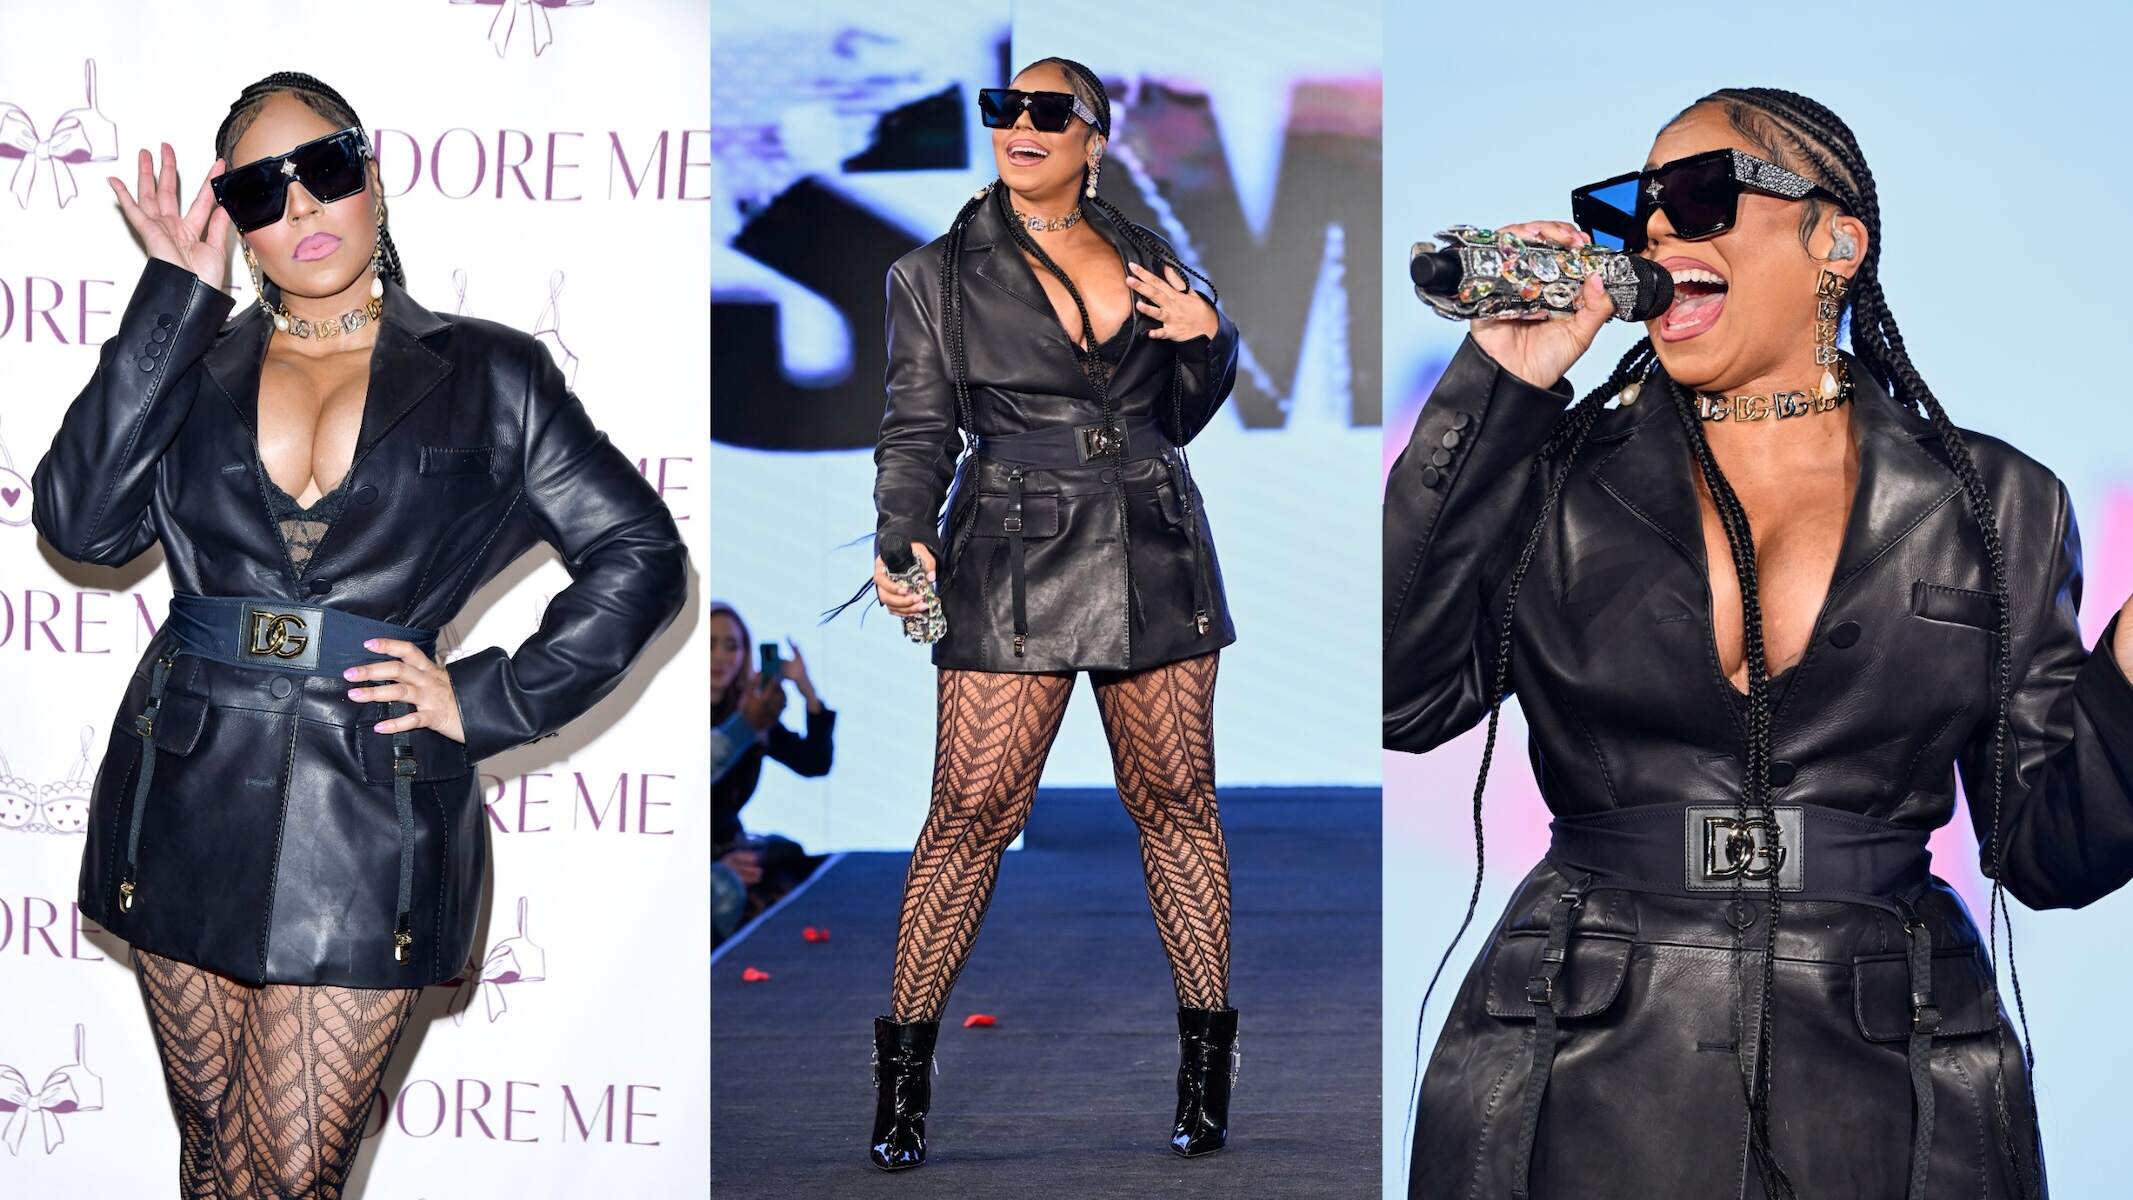 Wearing a black leather jacket, Ashanti poses backstage and performs during the Adore Me fashion show